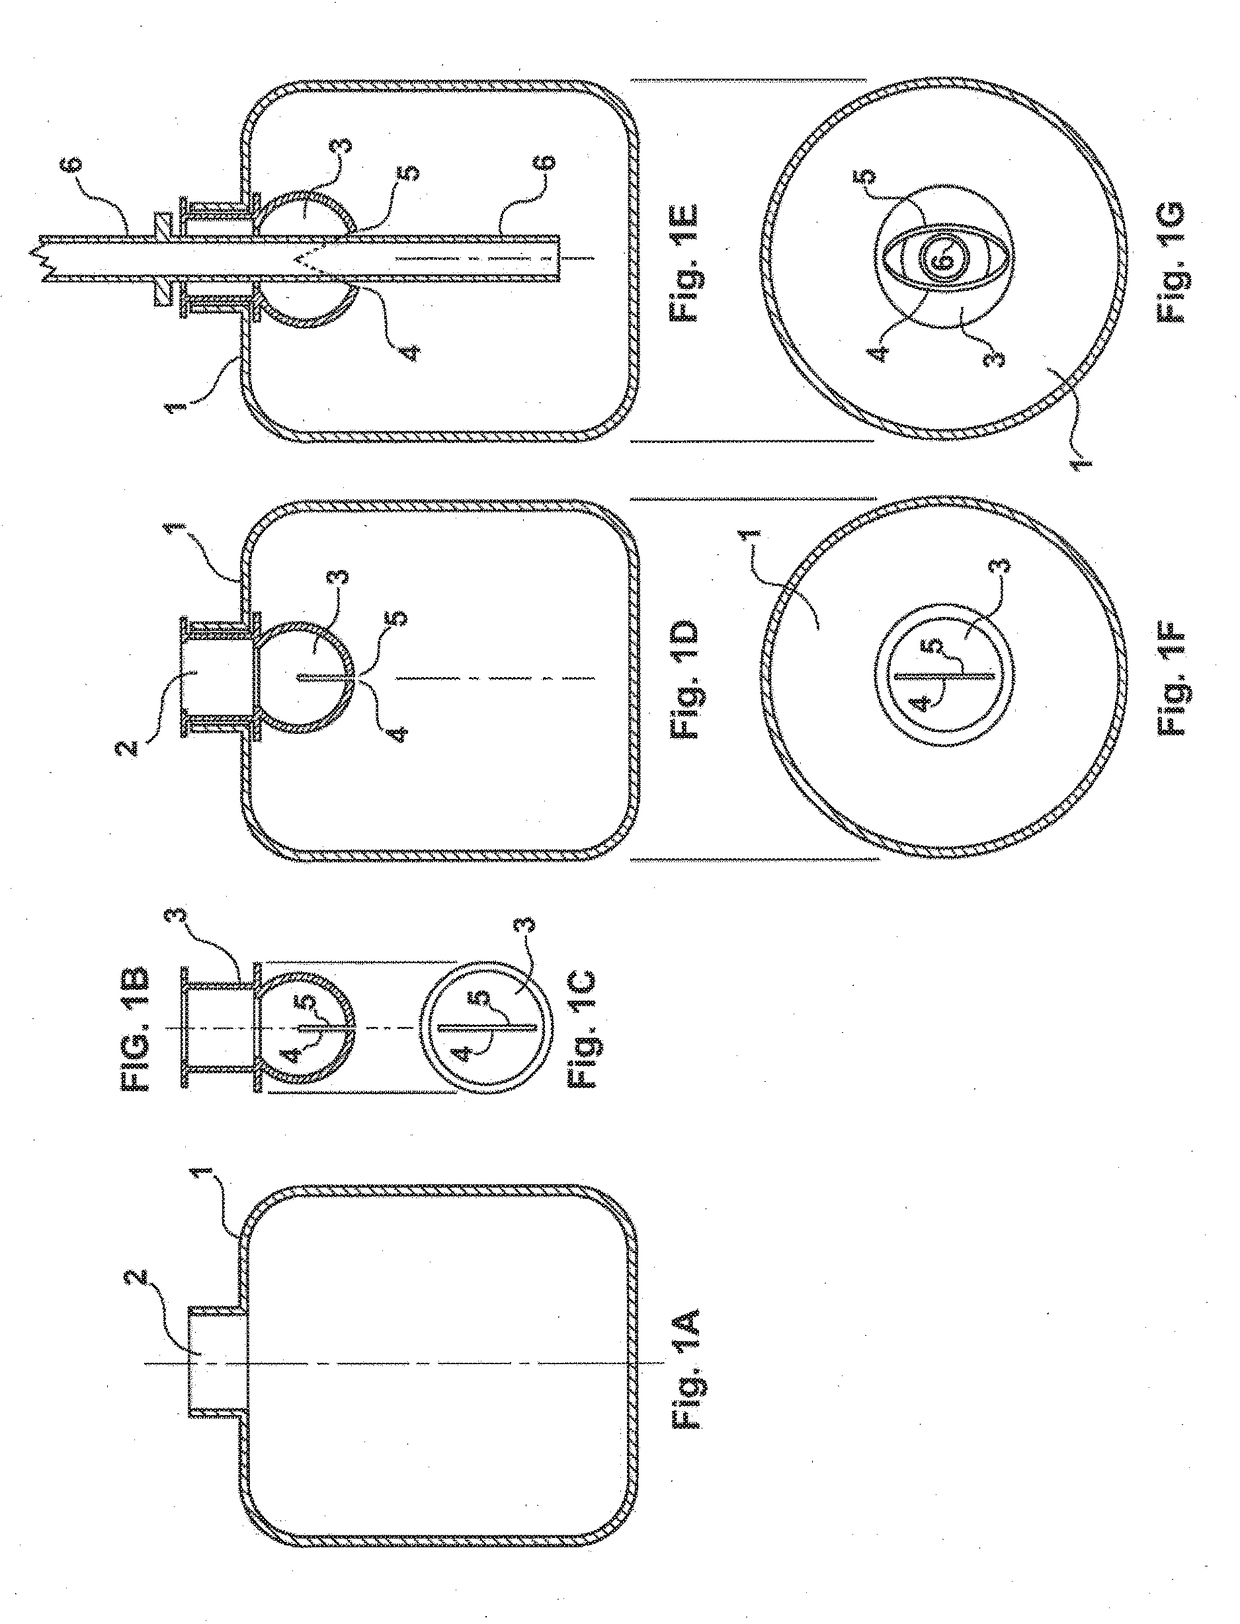 Urine-specimen collection, storage, and testing device